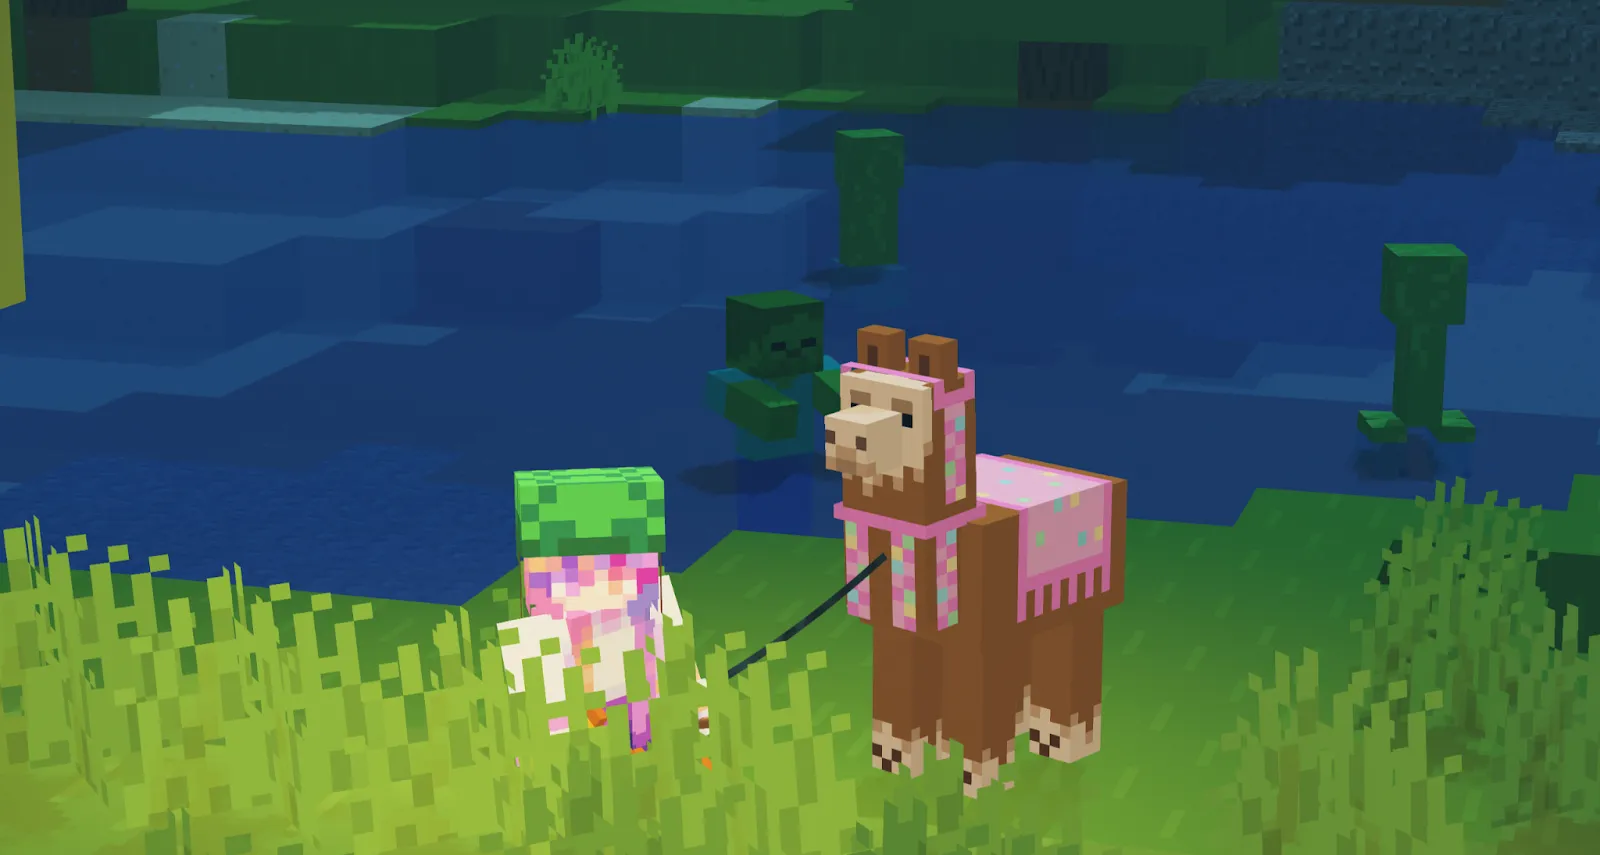 Minecraft Player and Llama with Zombies and Creepers in the background